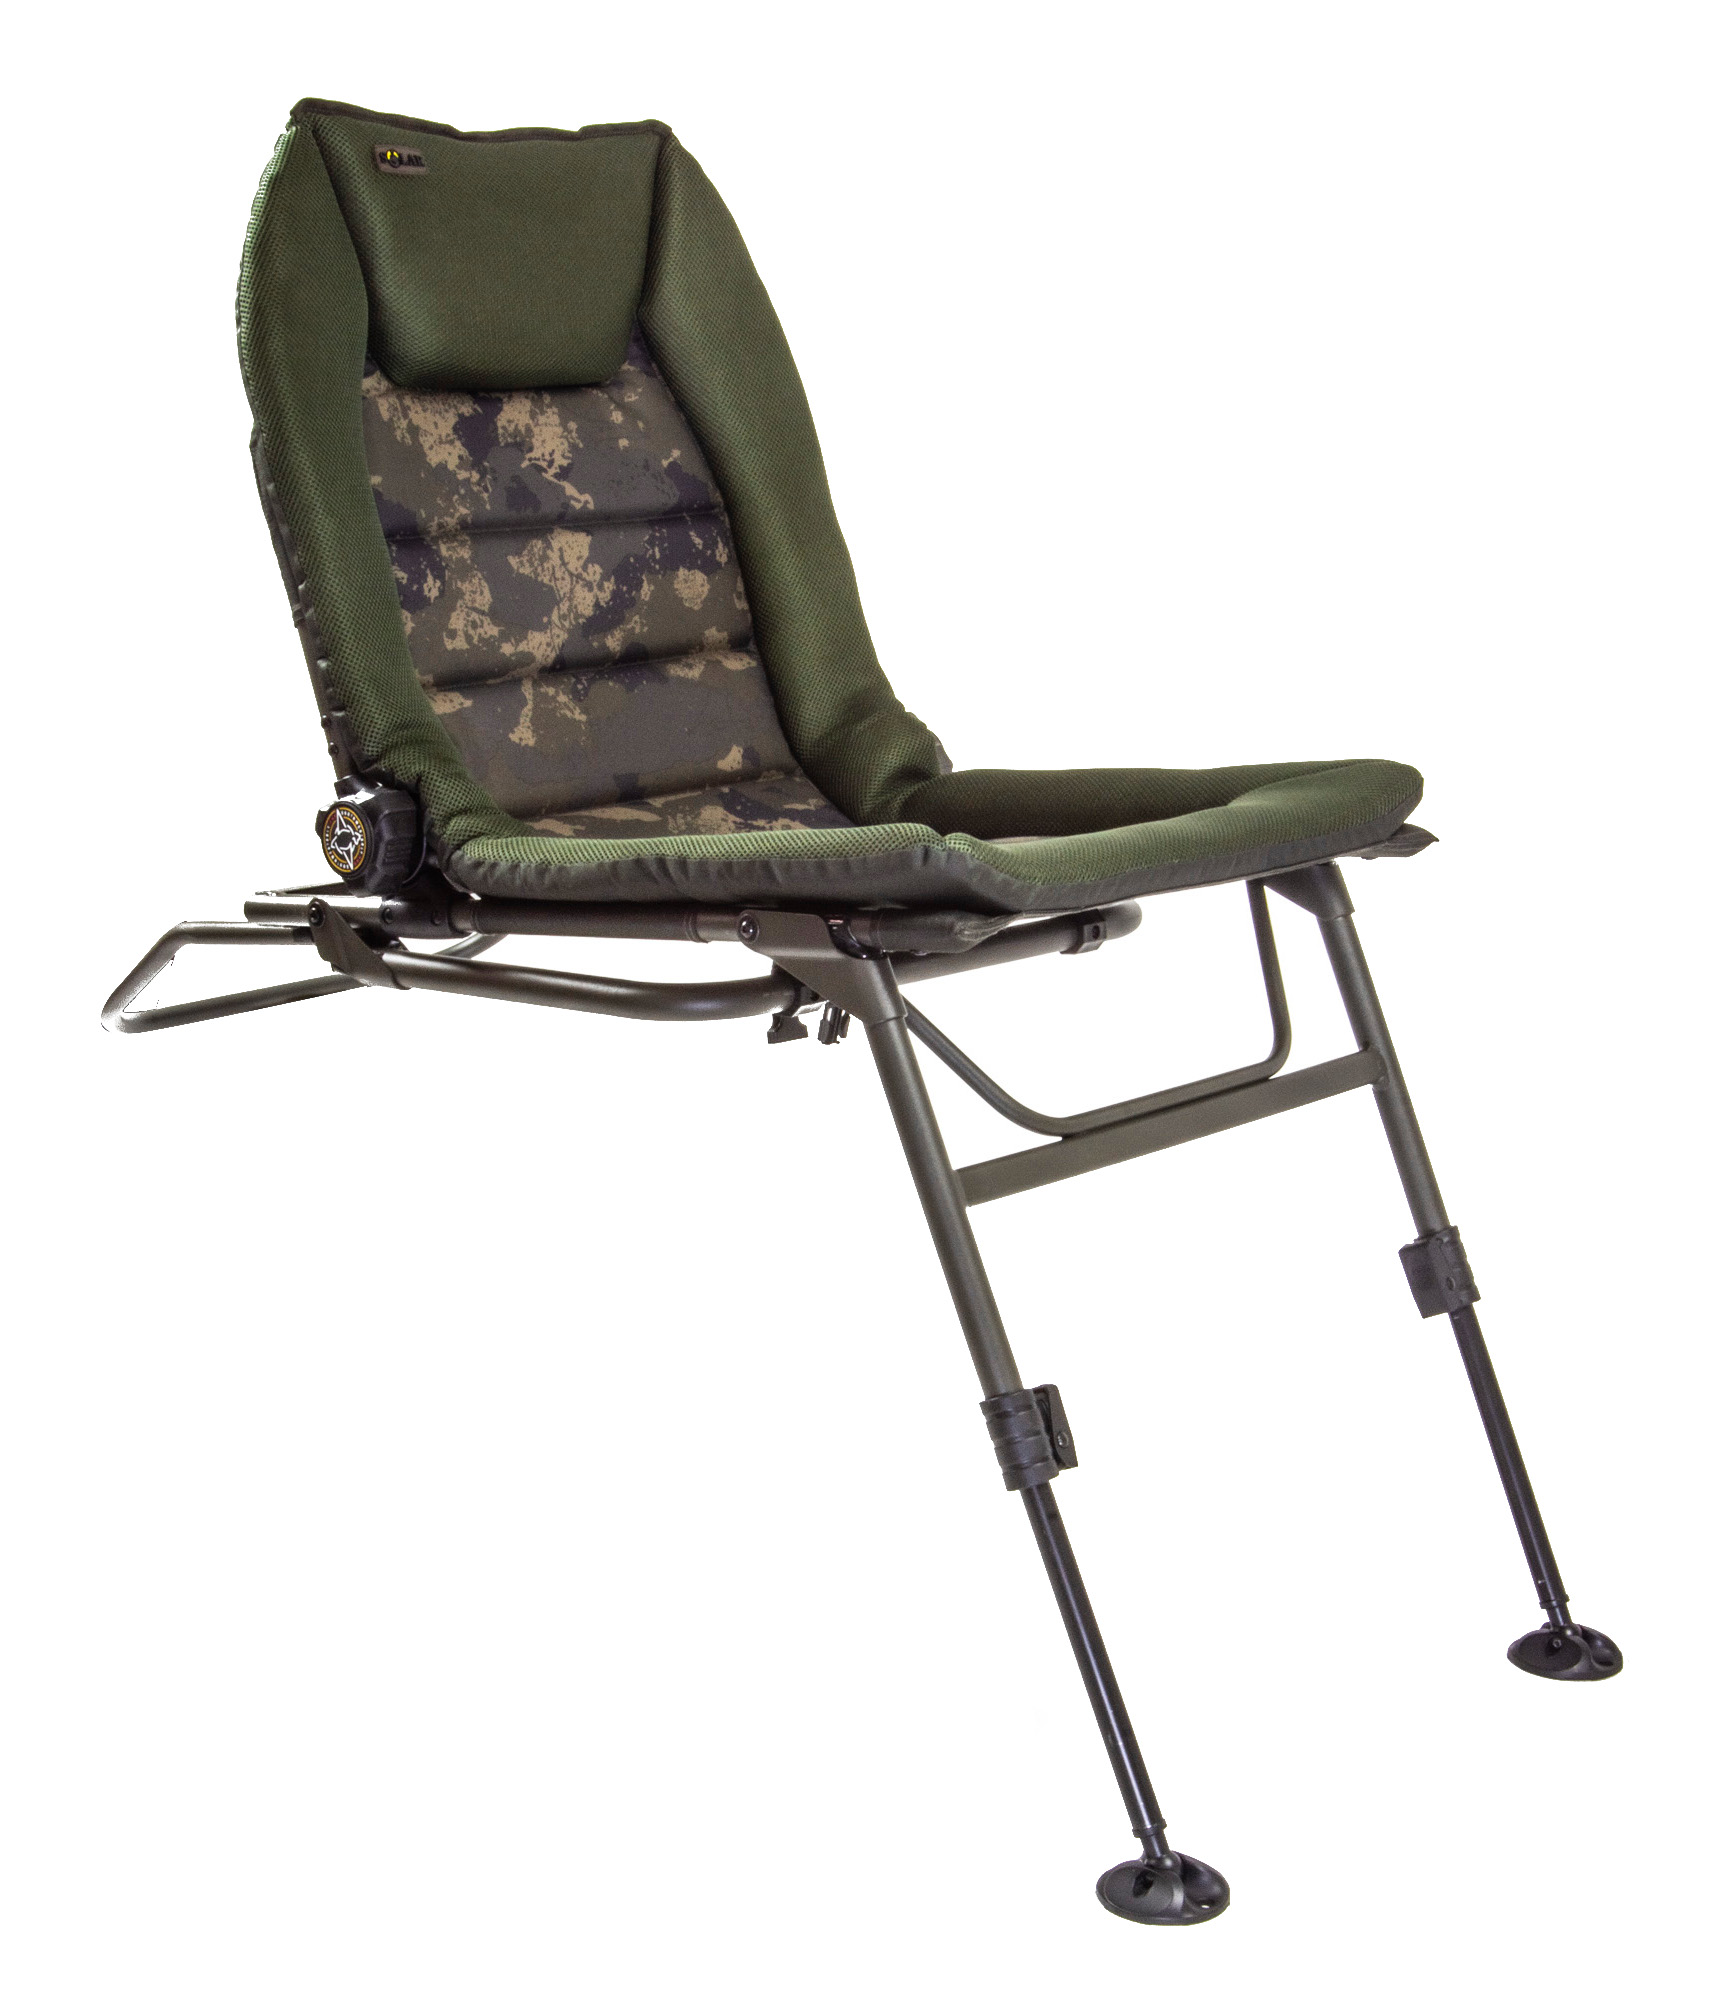 Solar South Westerly Pro Combi Chair Karpfen Stuhl (Bed-Fit & Recline)